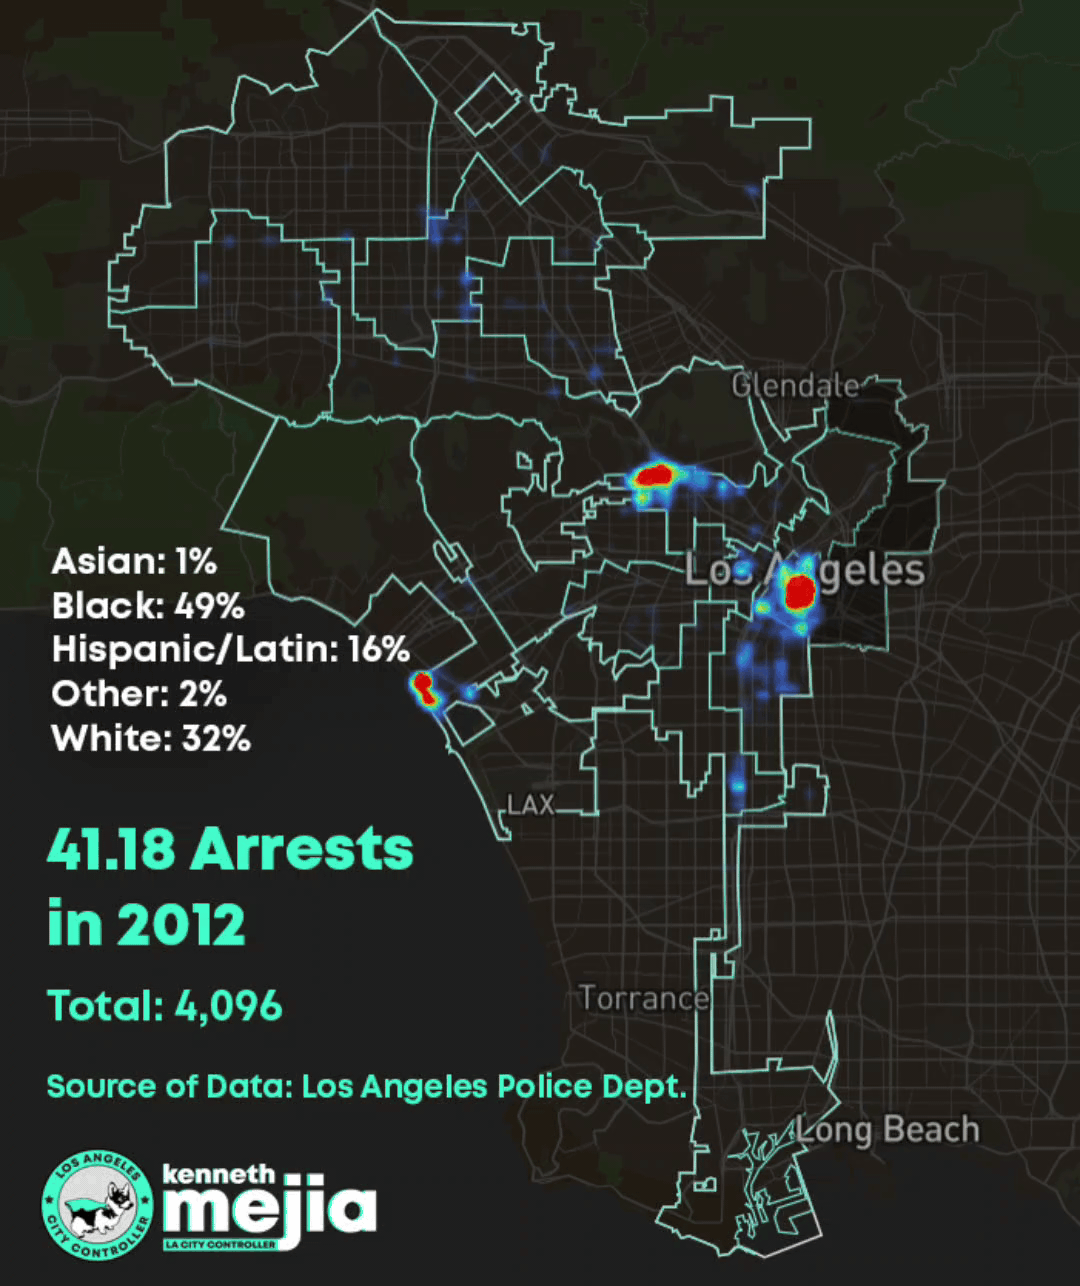 An animated gif of each year of the map, from 2012-2022, along with percentages of arrests by race. For 2012-2018, there are a lot more total arrests and they are most concentrated in Downtown LA, Hollywood, and Venice. For 2019-2022, total arrests are down from previous years. For 2012-2017, the percentage of those arrested who are Black is always between 40 to 50%. In 2018 the percentage of those arrested who are Black goes down each year. By 2022 Black people make up 19% of those arrested. From 2012-2017, White people make up about 30% of those arrested each year. Starting in 2018, White people makeup about 40% of those arrested each year. Hispanic/Latin people make up between 15-25% of those arrested each year from 2012-2019, and then arrests start rising in 2020 - they make up 38% of those arrested in 2022. The areas that are most concentrated with the highest total arrests vary - in 2019 Skid Row and Venice have higher arrests. In 2020 Venice has higher arrests. In 2019 and 2020, West Los Angeles has higher arrests. In 2020, Chatsworth and Westlake-MacArthur Park have higher arrests too. The Source of Data is LAPD.